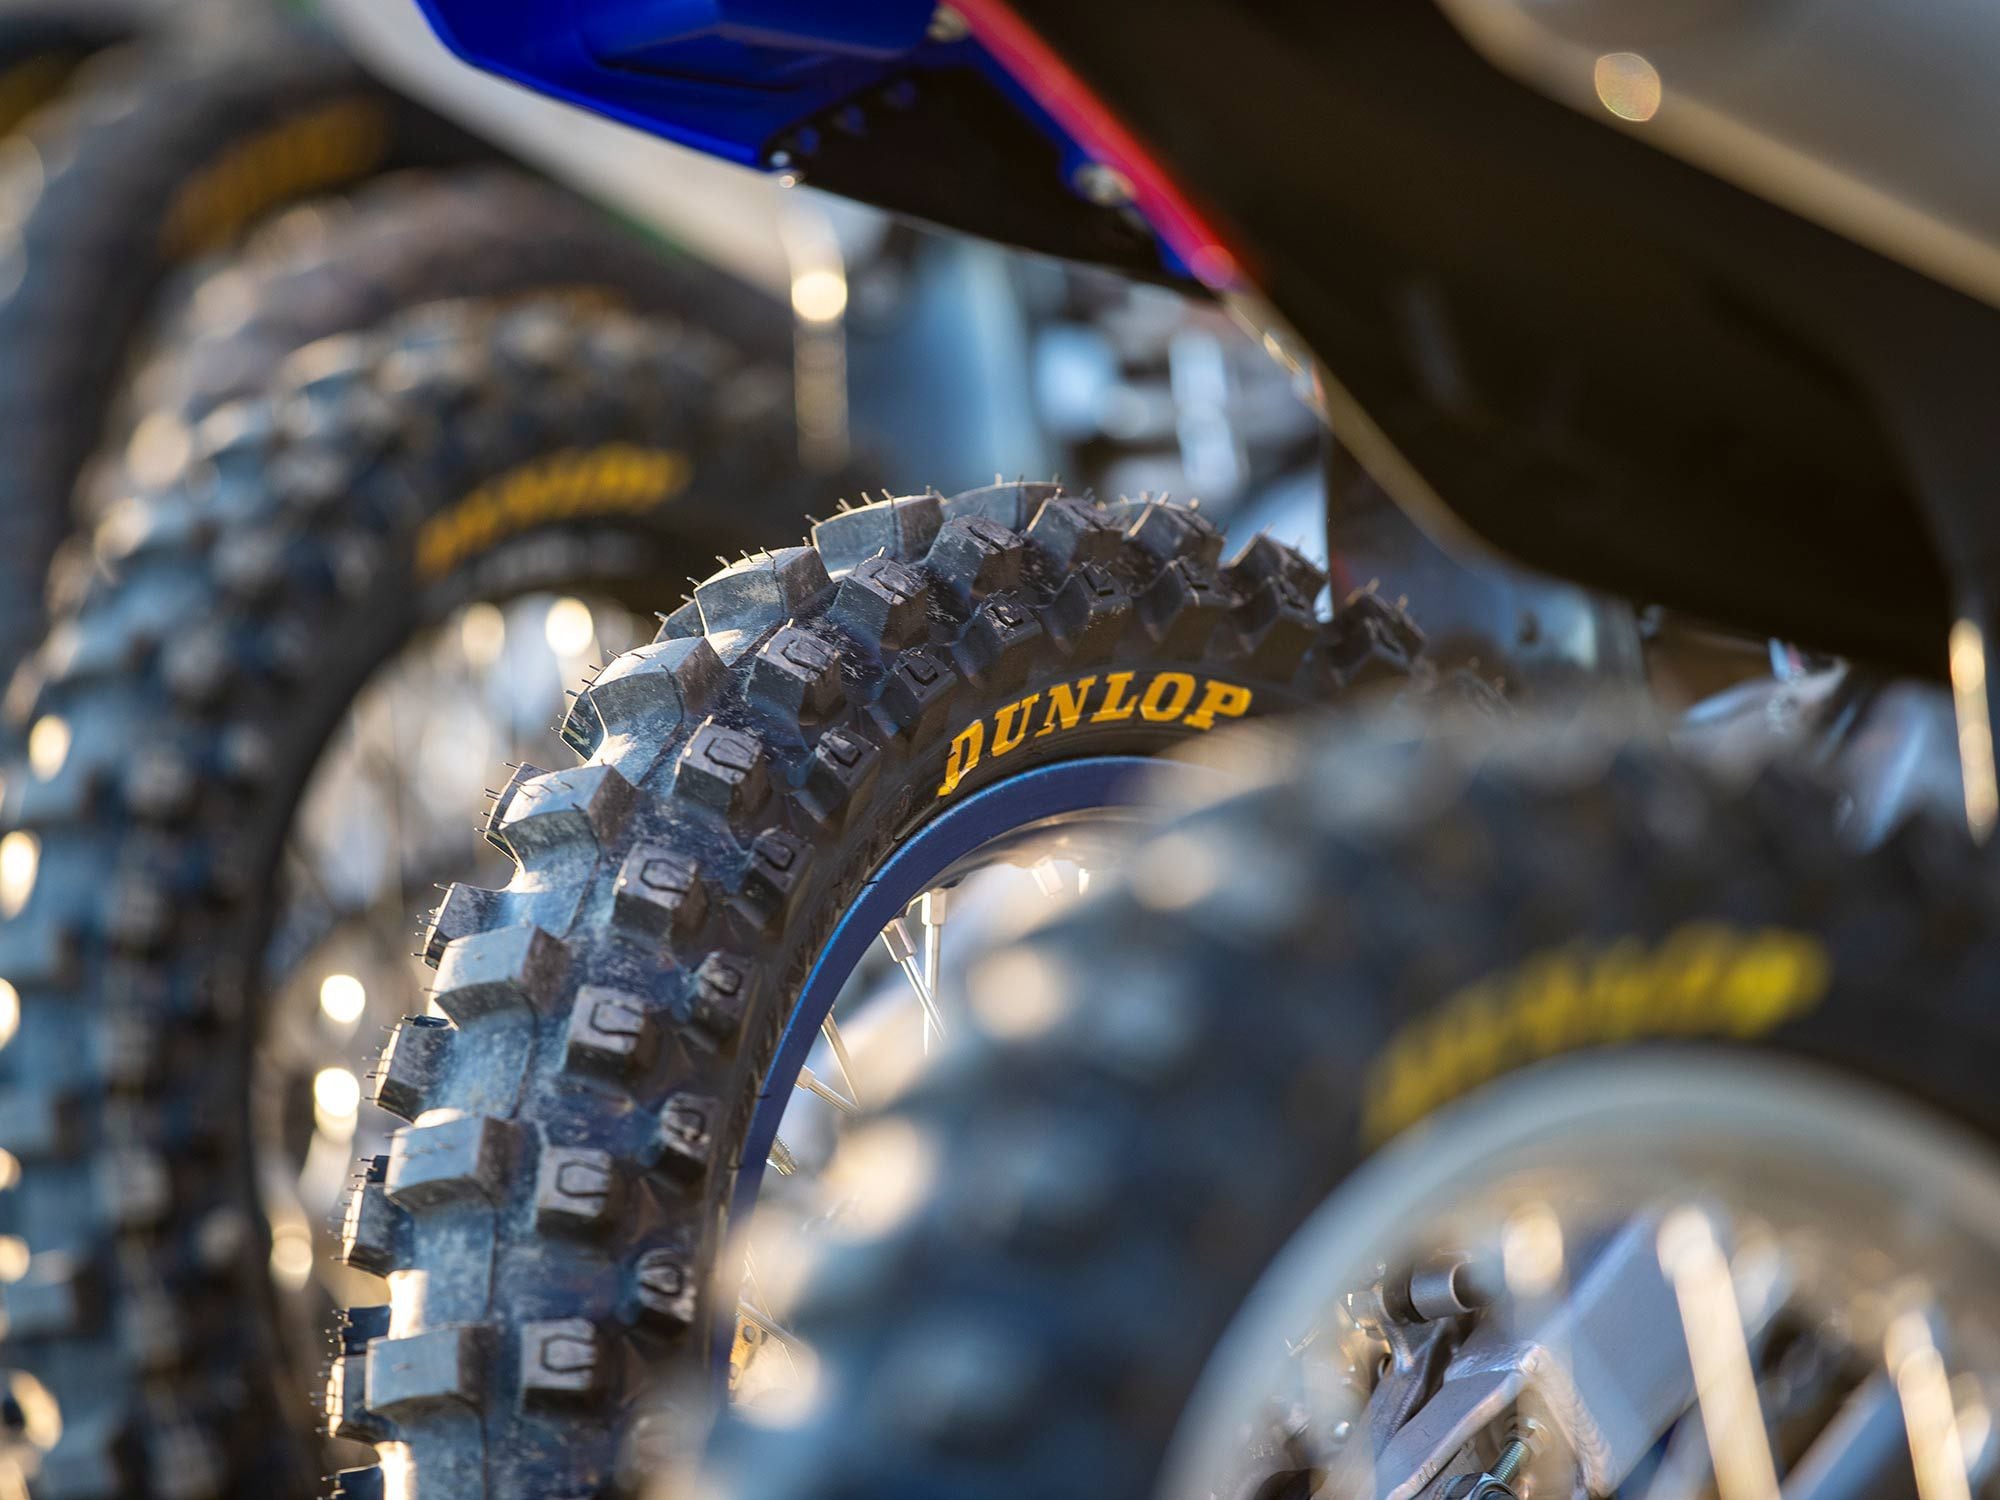 Traction parity was ensured with the use of Dunlop Geomax MX33 soft-to-intermediate-terrain tires.